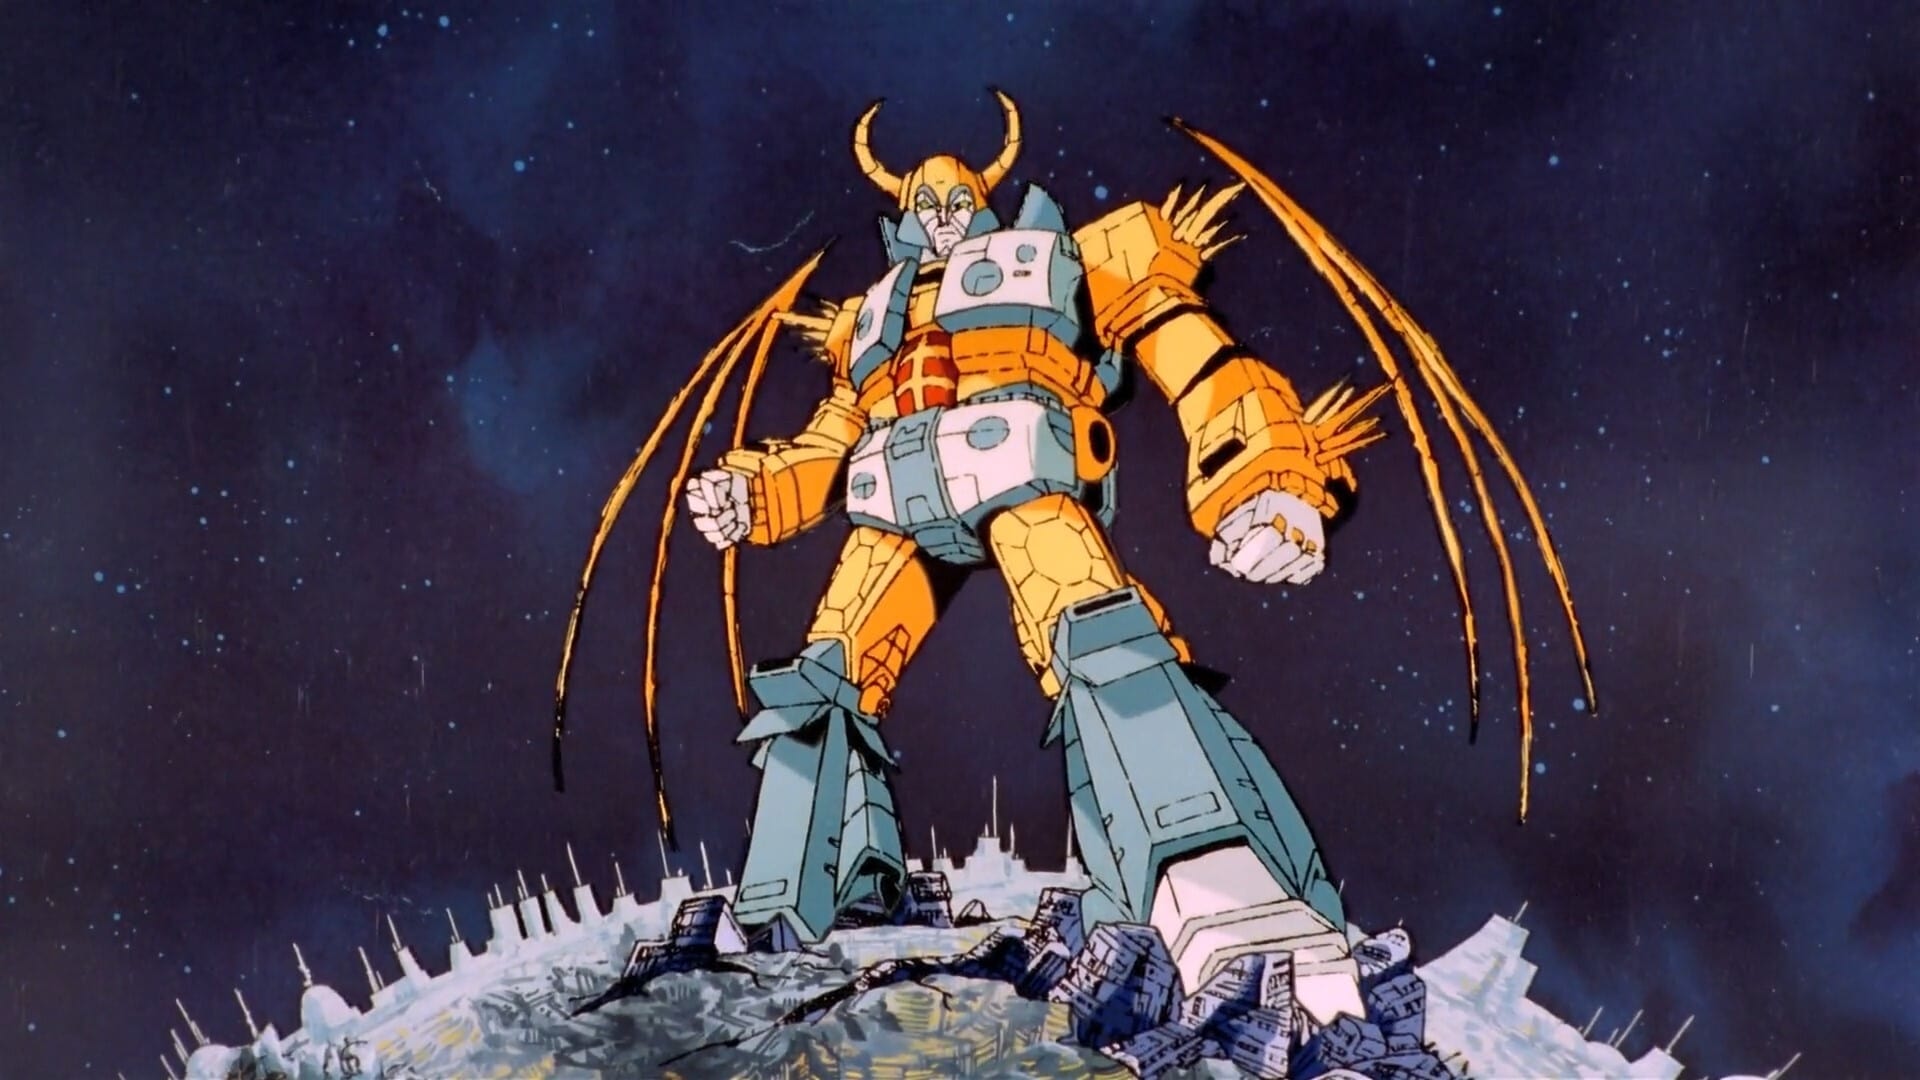 Transformers: The Movie (1986)